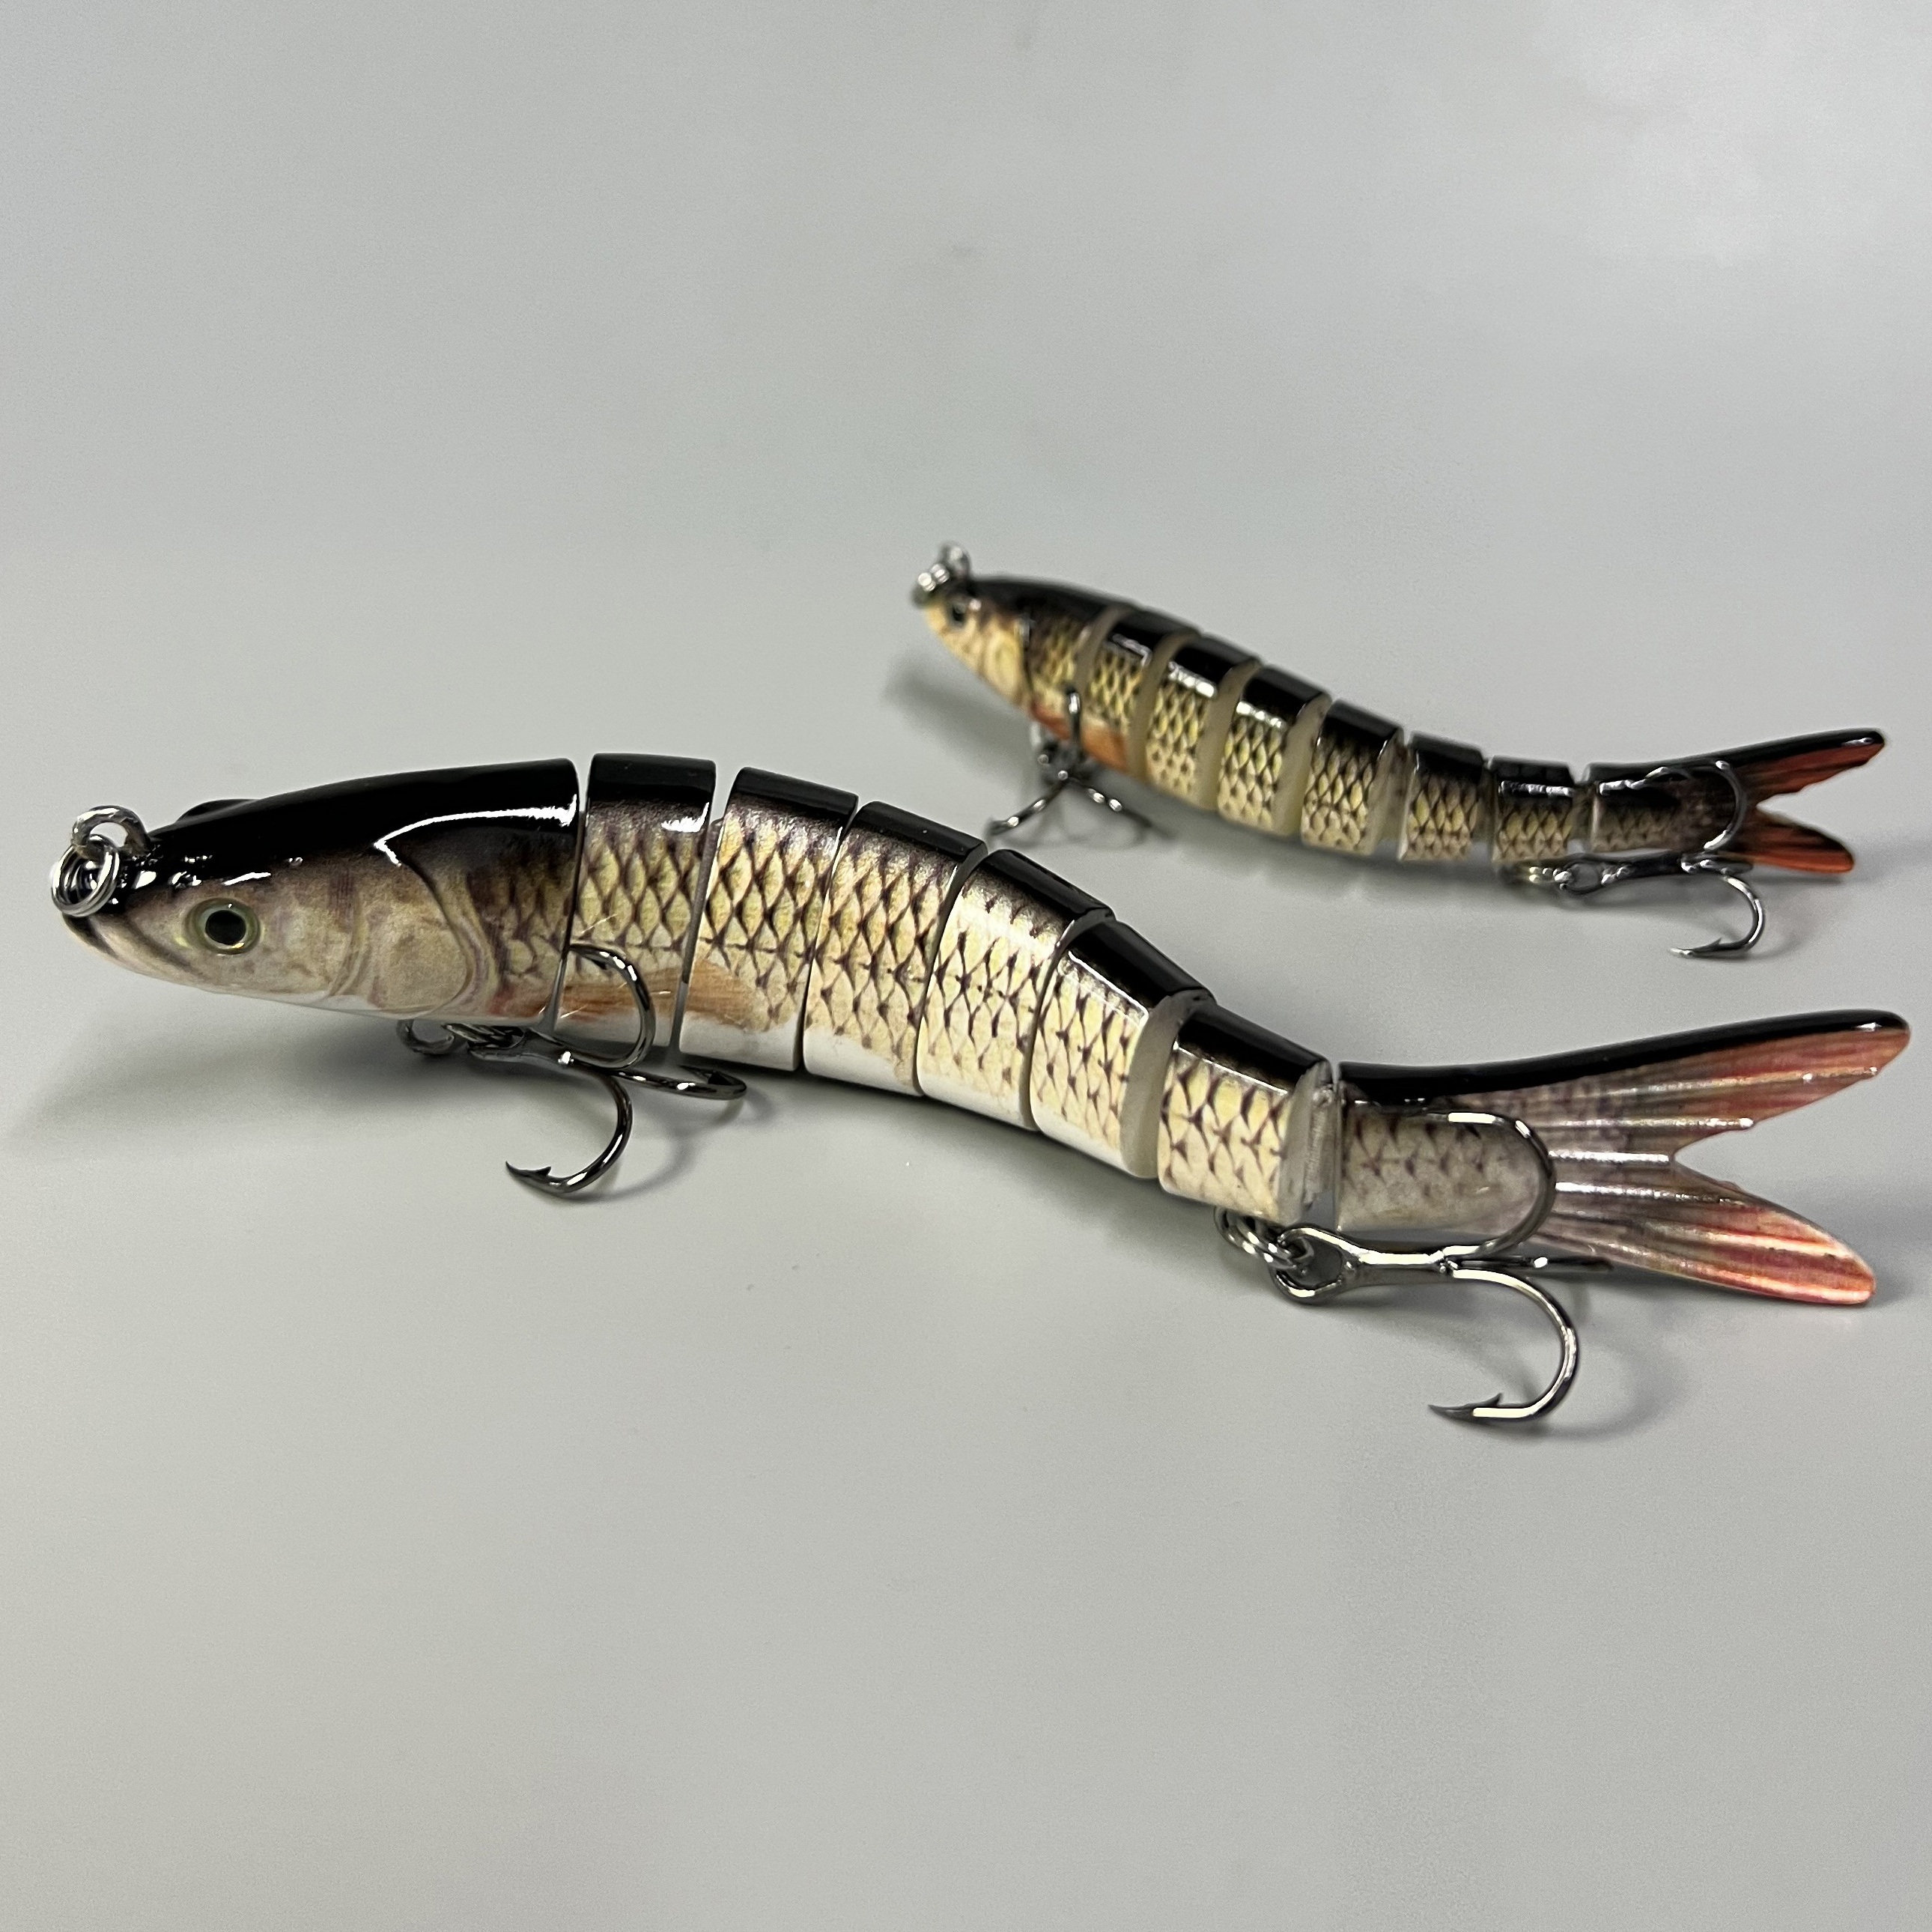 3.94/5.51inch Sinking Wobblers, Fishing Lures, Jointed Crankbait, Swimbait  8 Segment, Hard Artificial Bait For Fishing Tackle Lure